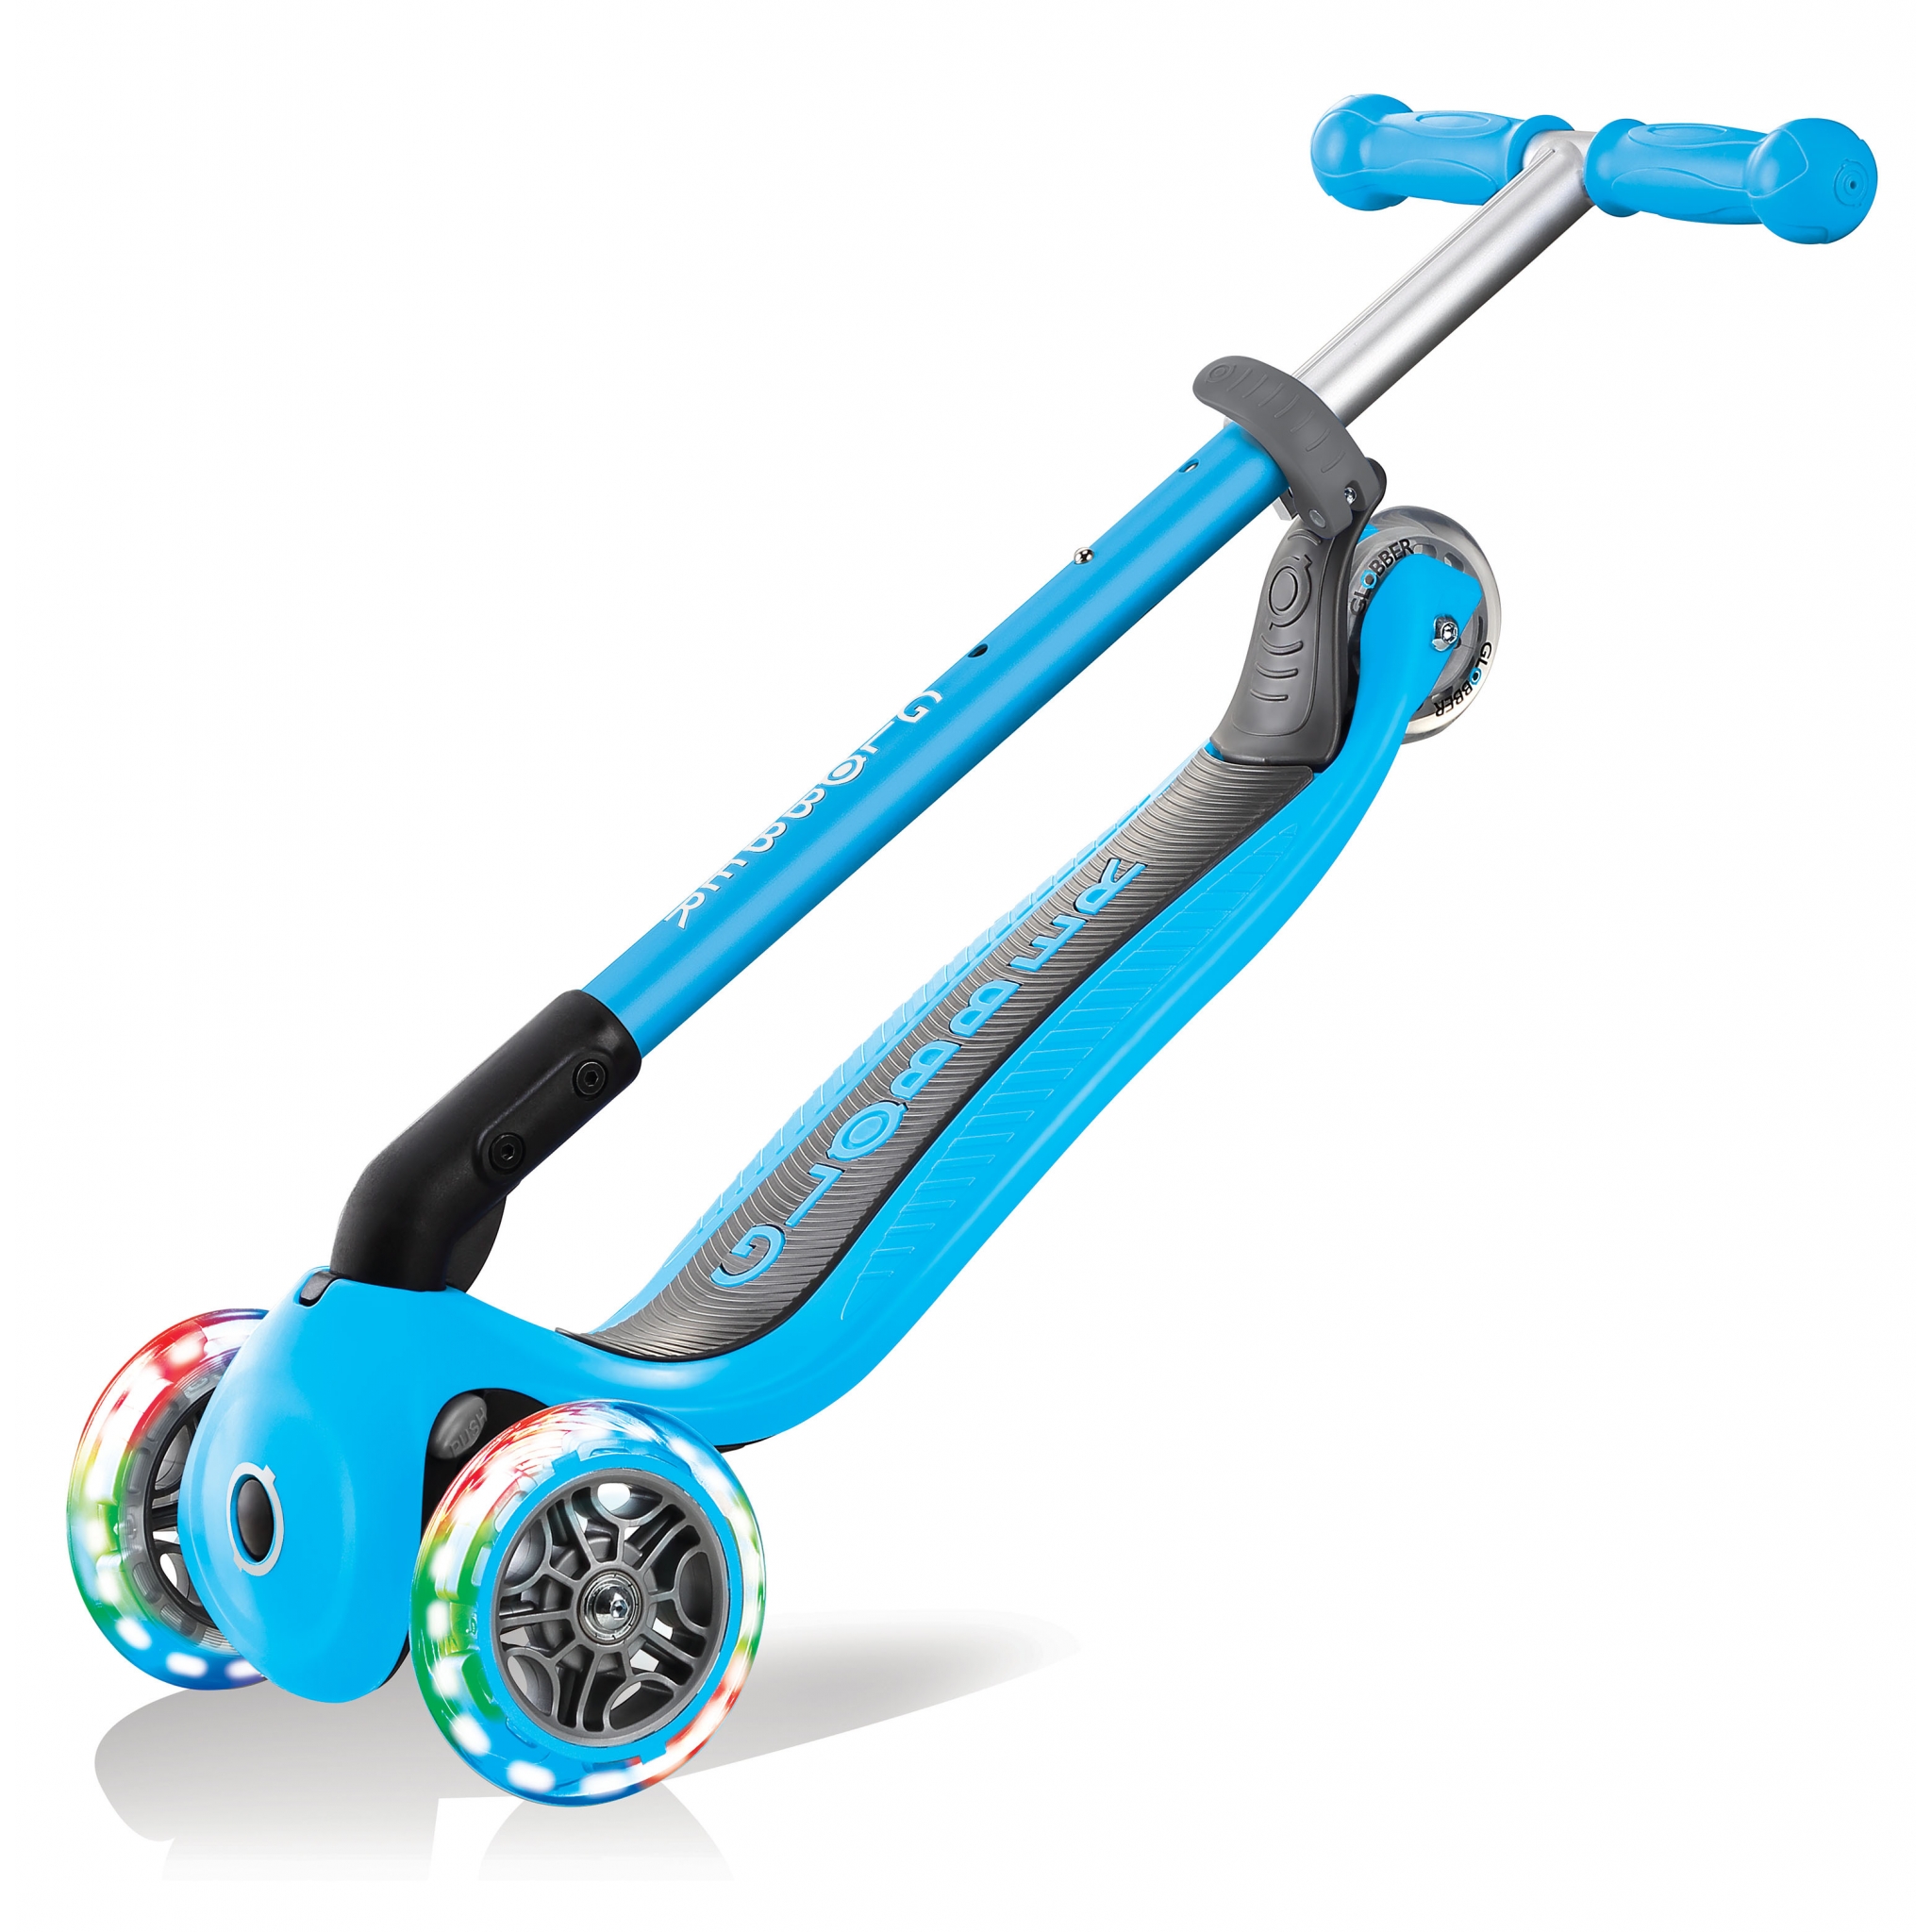 PRIMO-FOLDABLE-LIGHTS-3-wheel-foldable-scooter-for-kids-trolley-mode-sky-blue 2